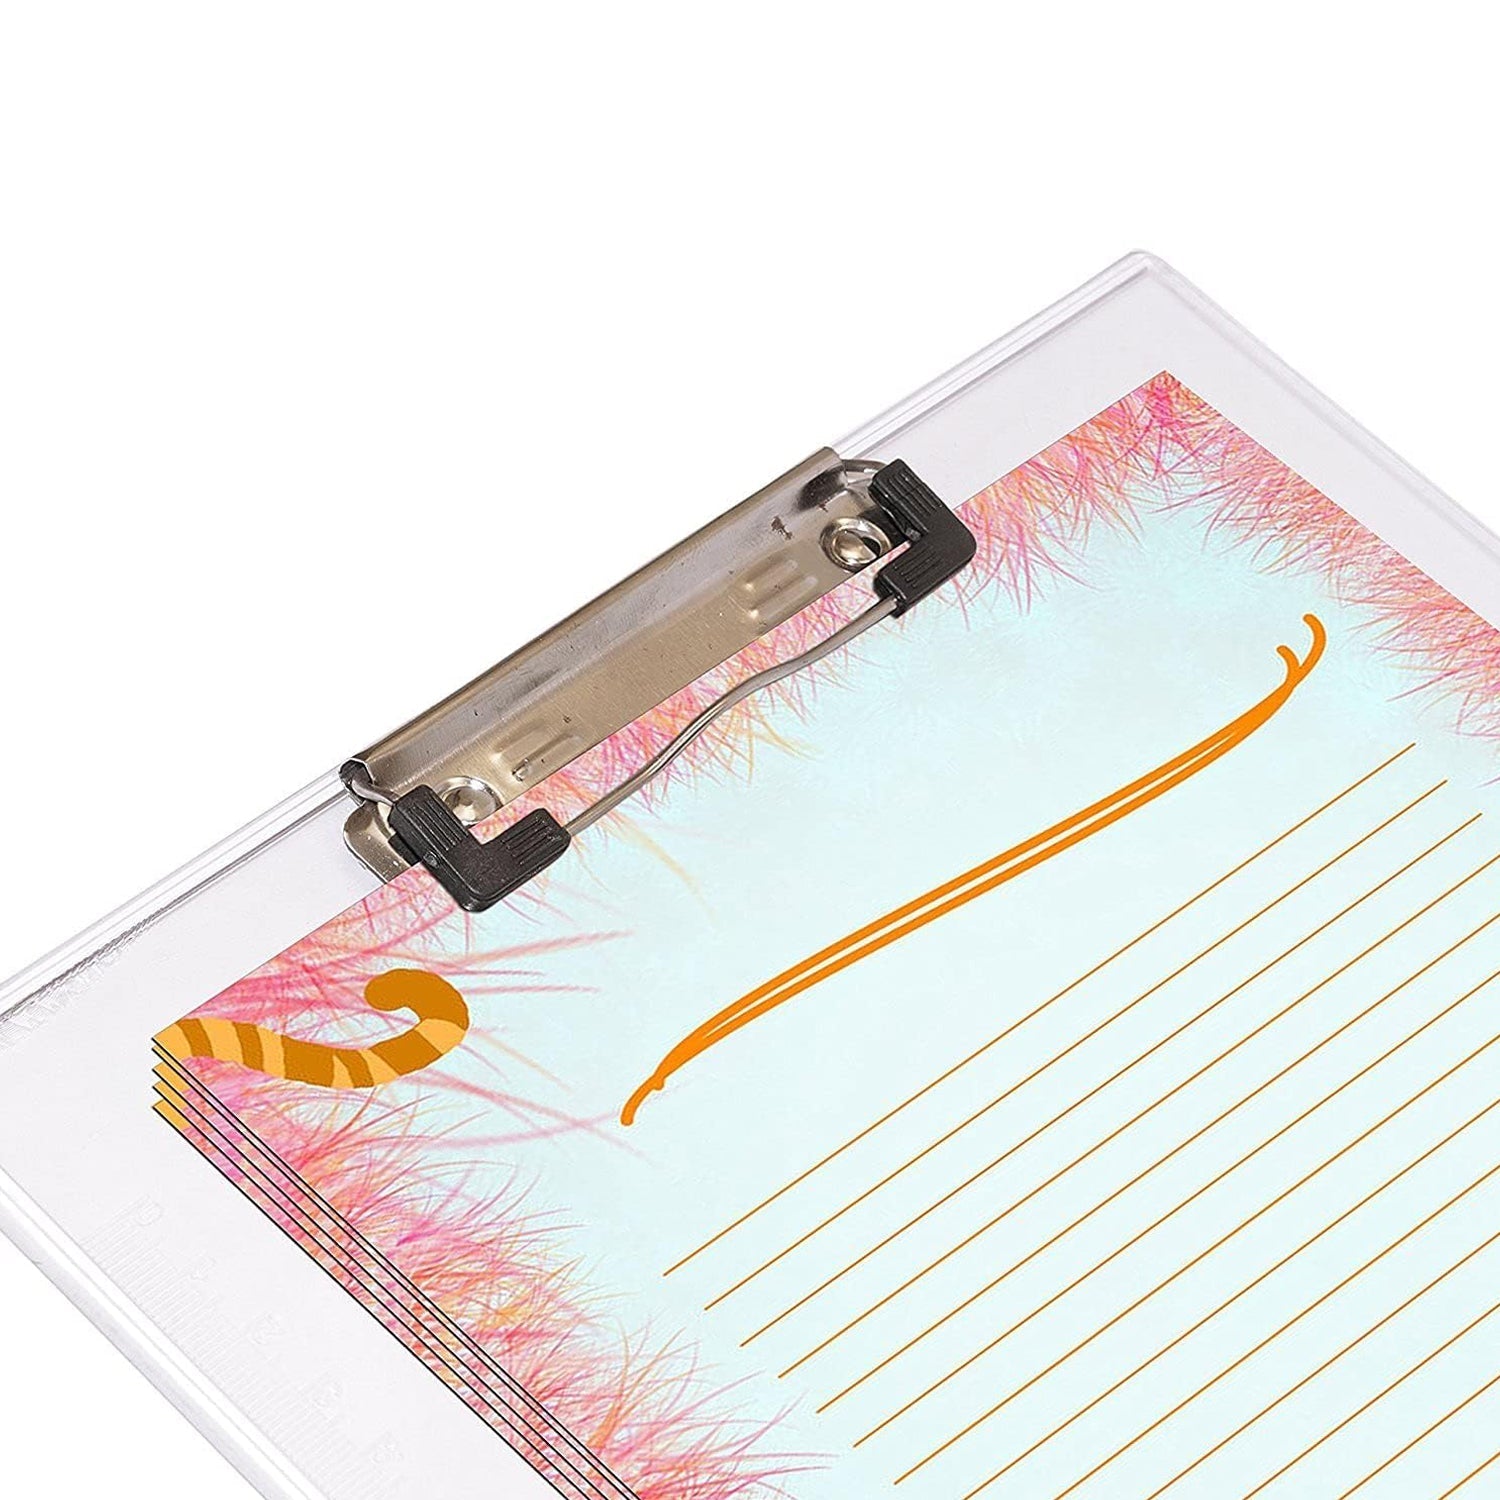 4080 Transparent Premium Exam Pad Best for Students in All Exams Unbreakable Flexible Board with a Centimeter Measuring Side Pad For School & Exam Use DeoDap